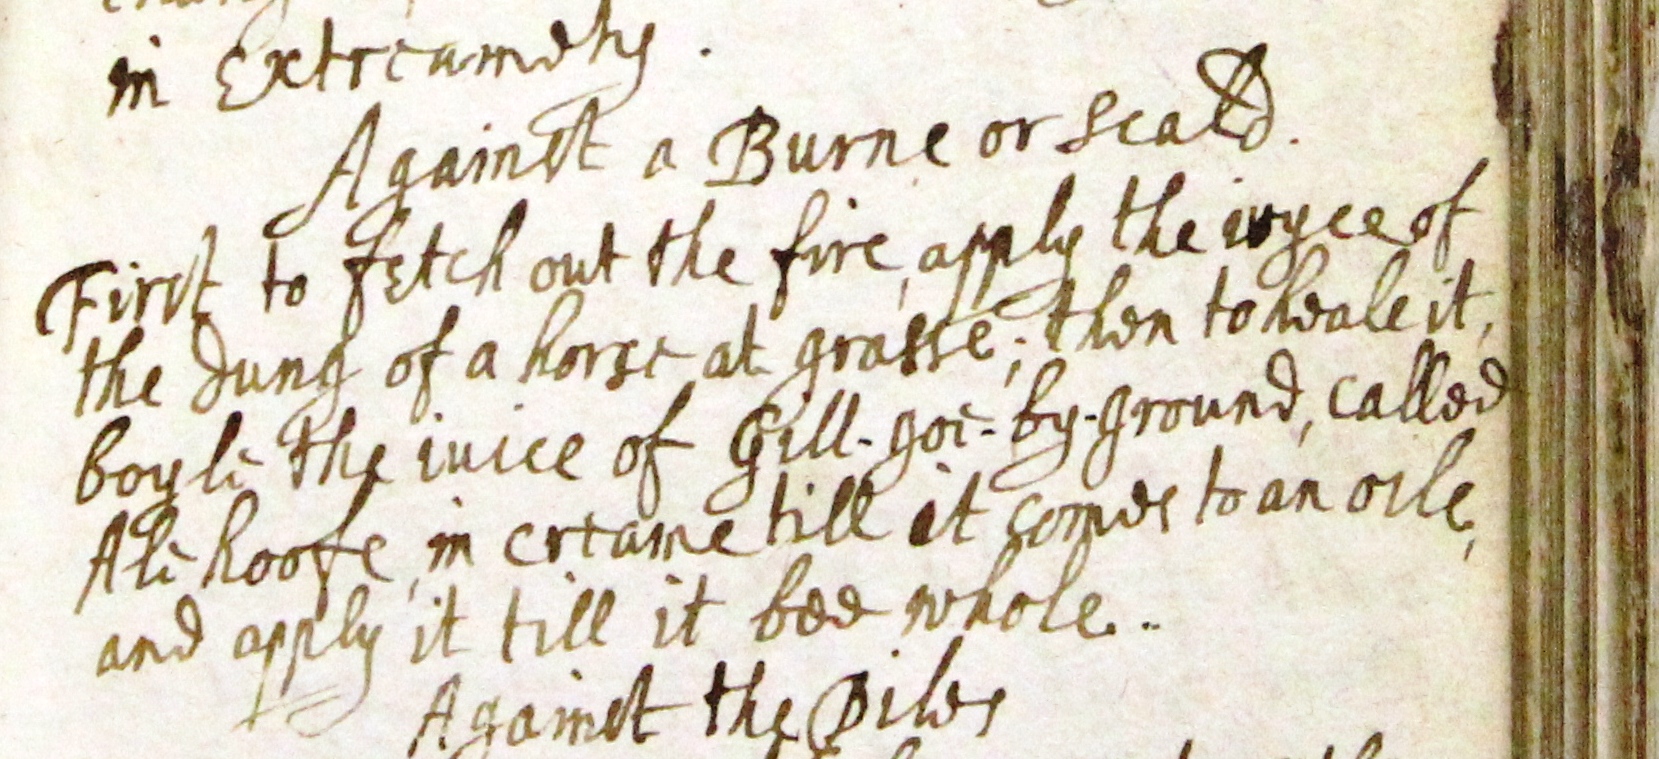 Against a burne or scald’. Receipt book. Author unknown, 1644–1691